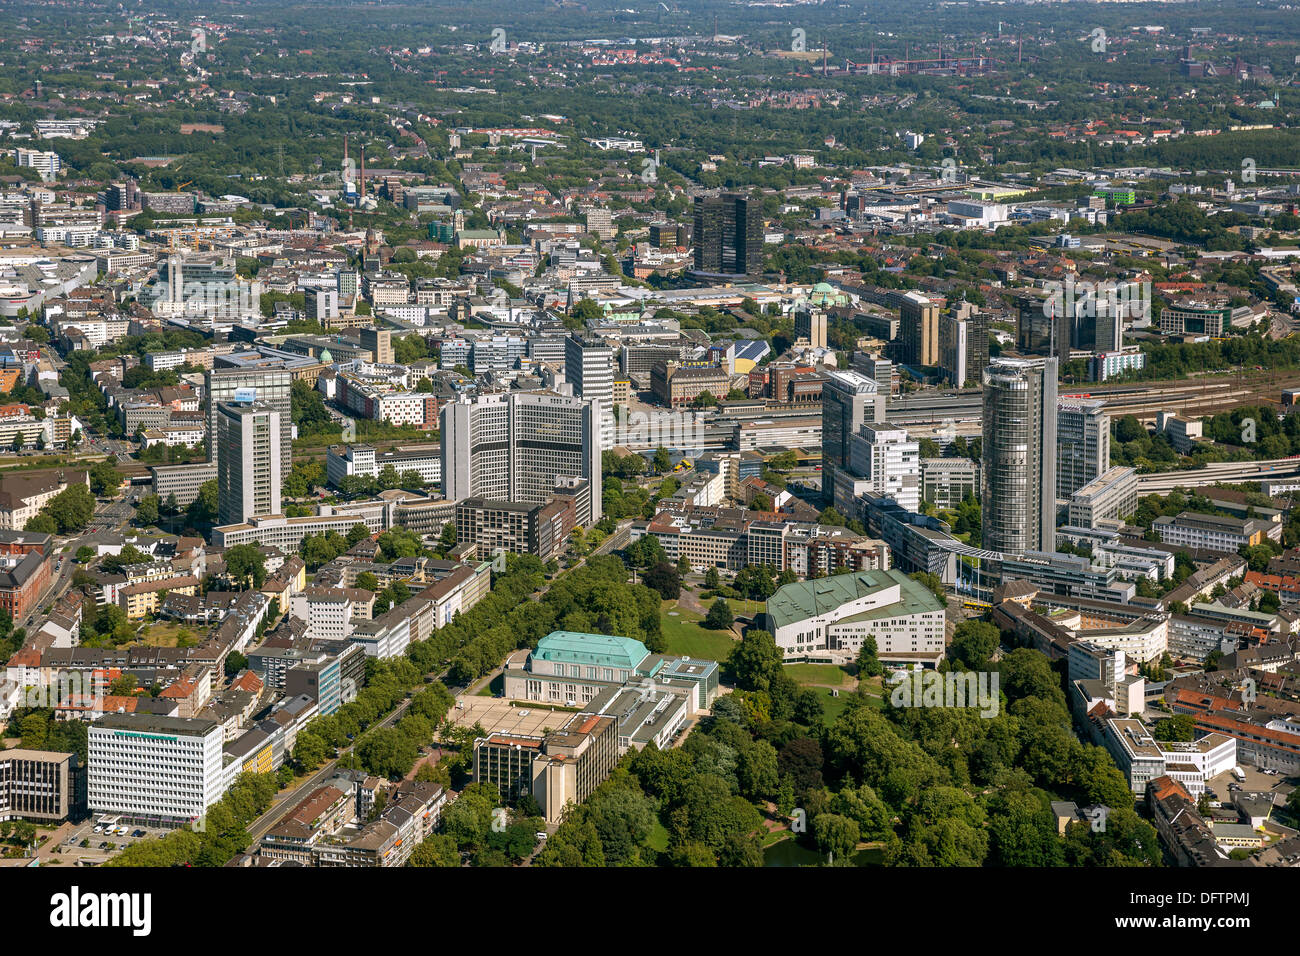 Aerial view, town centre with the Evonik high-rise building and the building of RWE Power, Essen, North Rhine-Westphalia Stock Photo